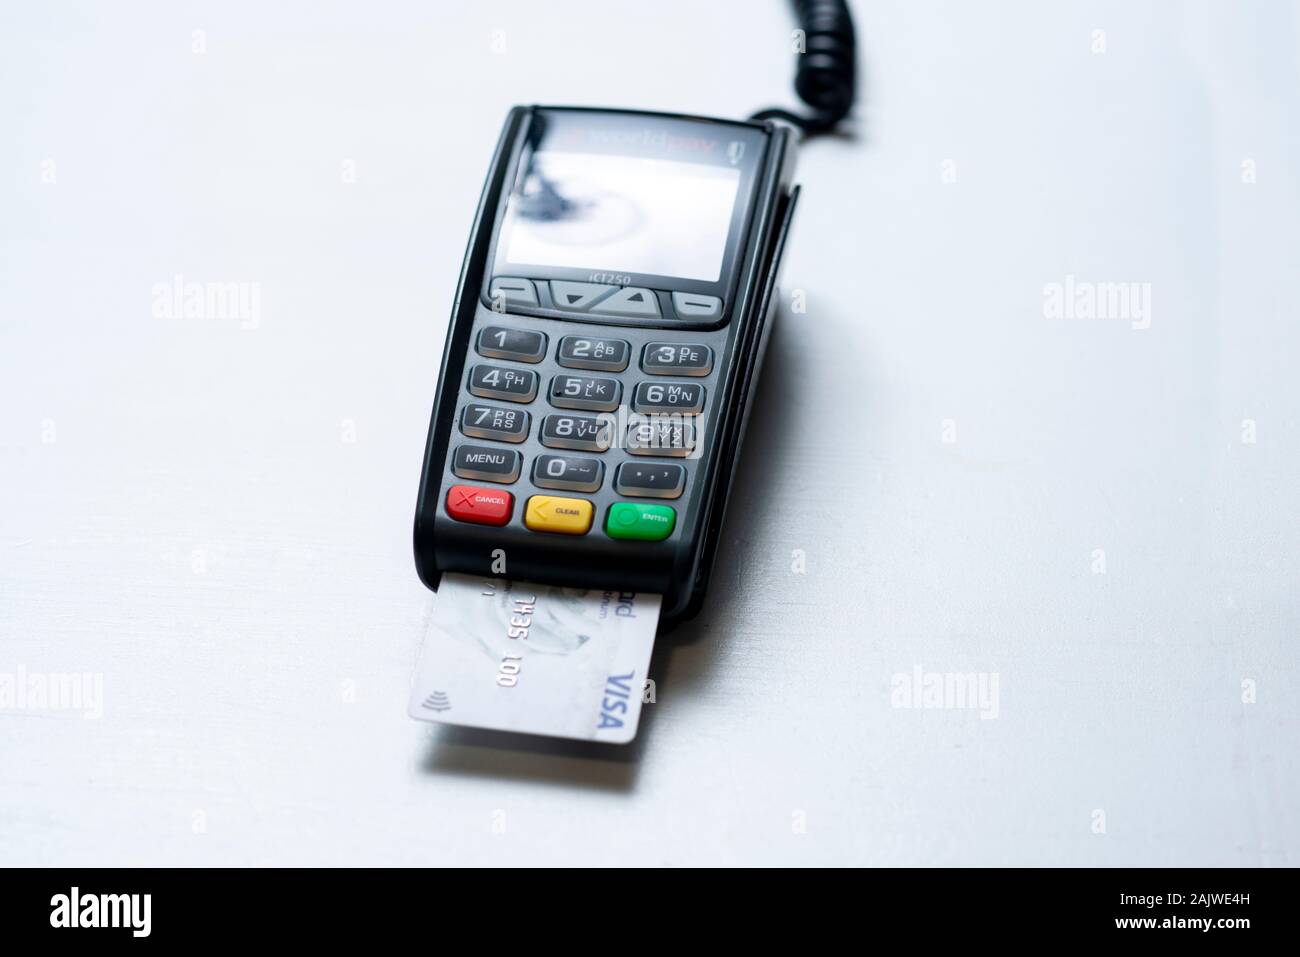 Contactless card reader on white background Stock Photo